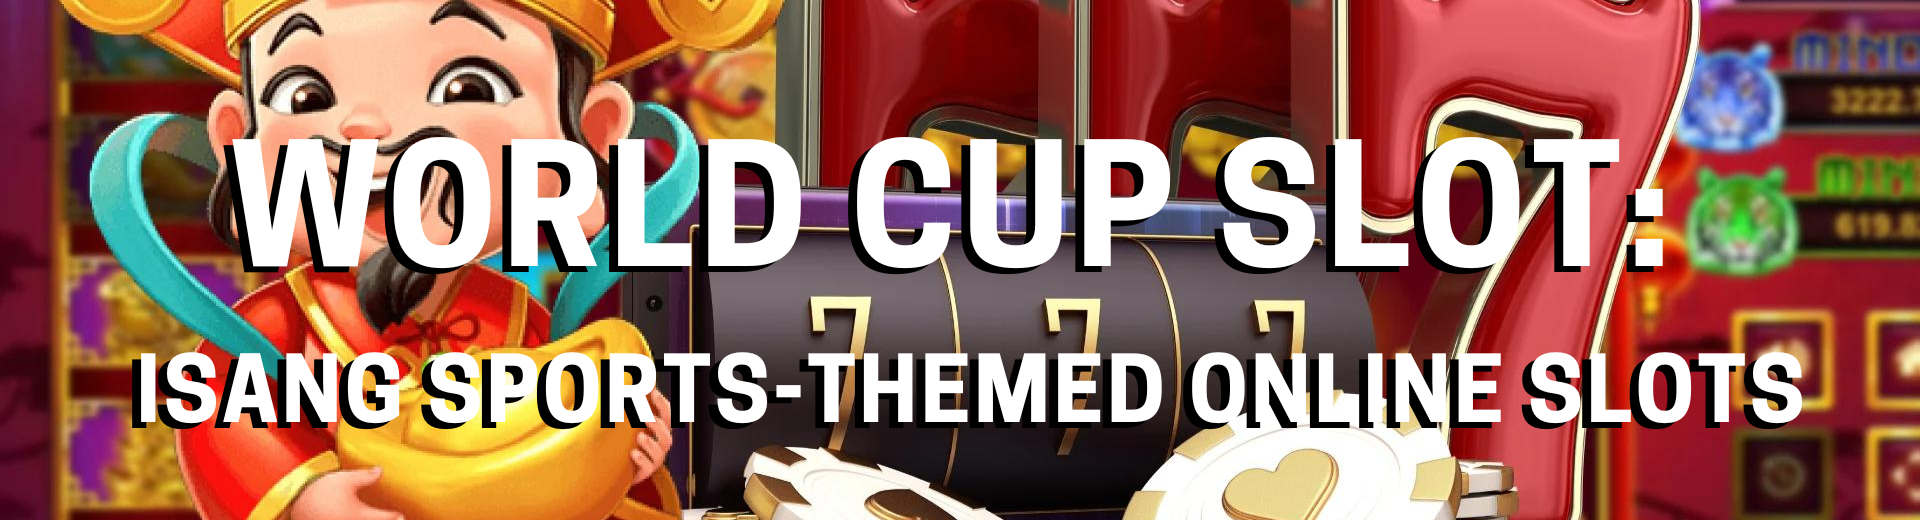 World Cup Slot Isang Sports-Themed Online Slots